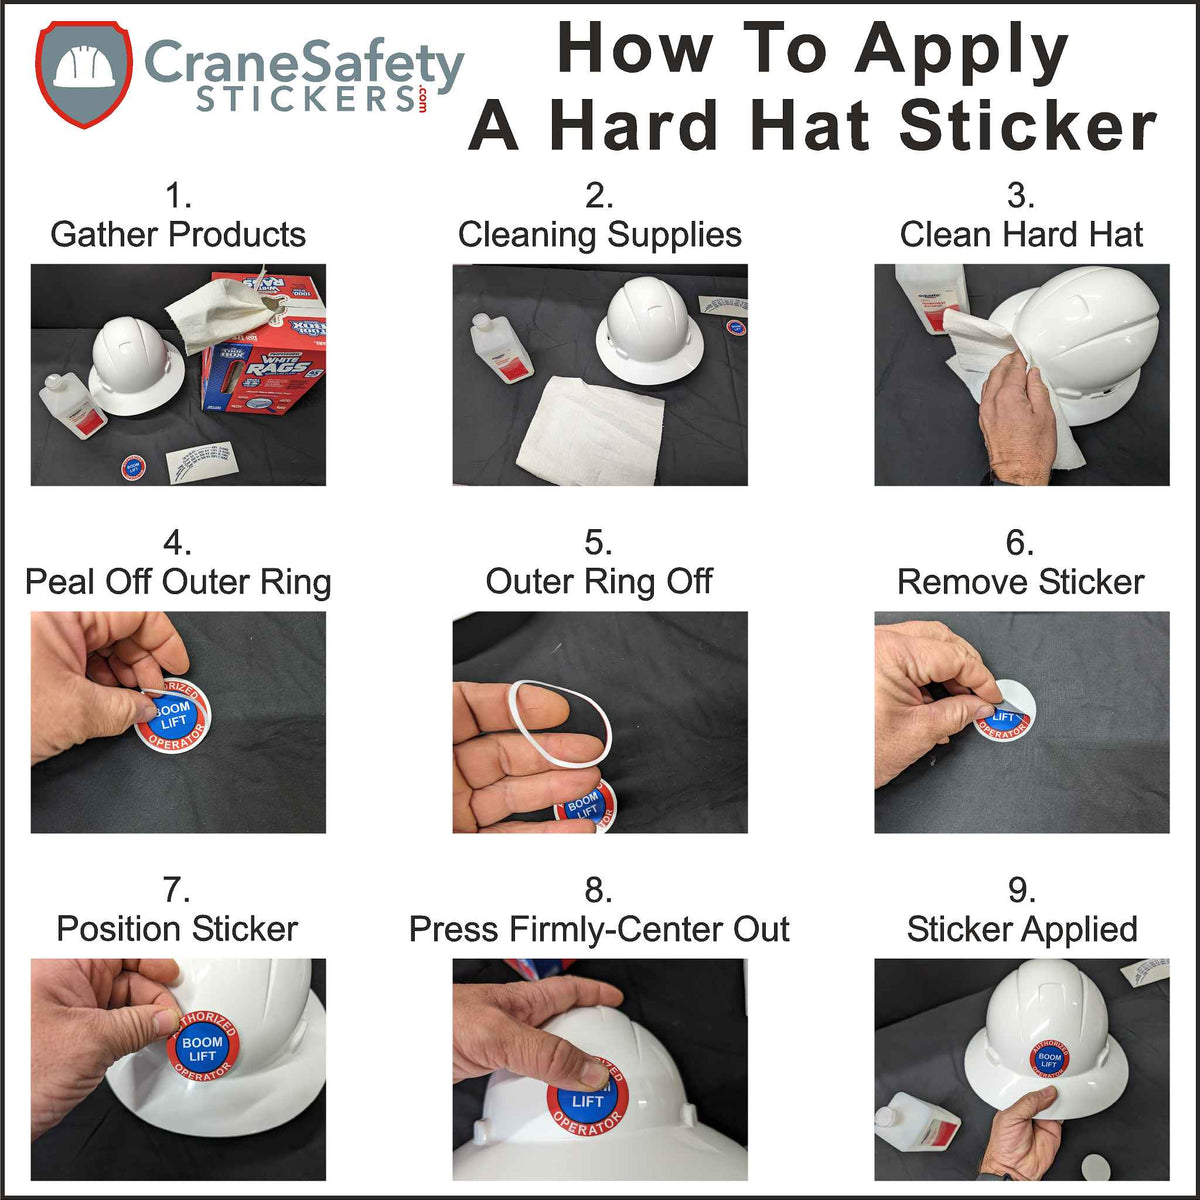 How to apply our pallet jack safety trained sticker onto a hard hat.